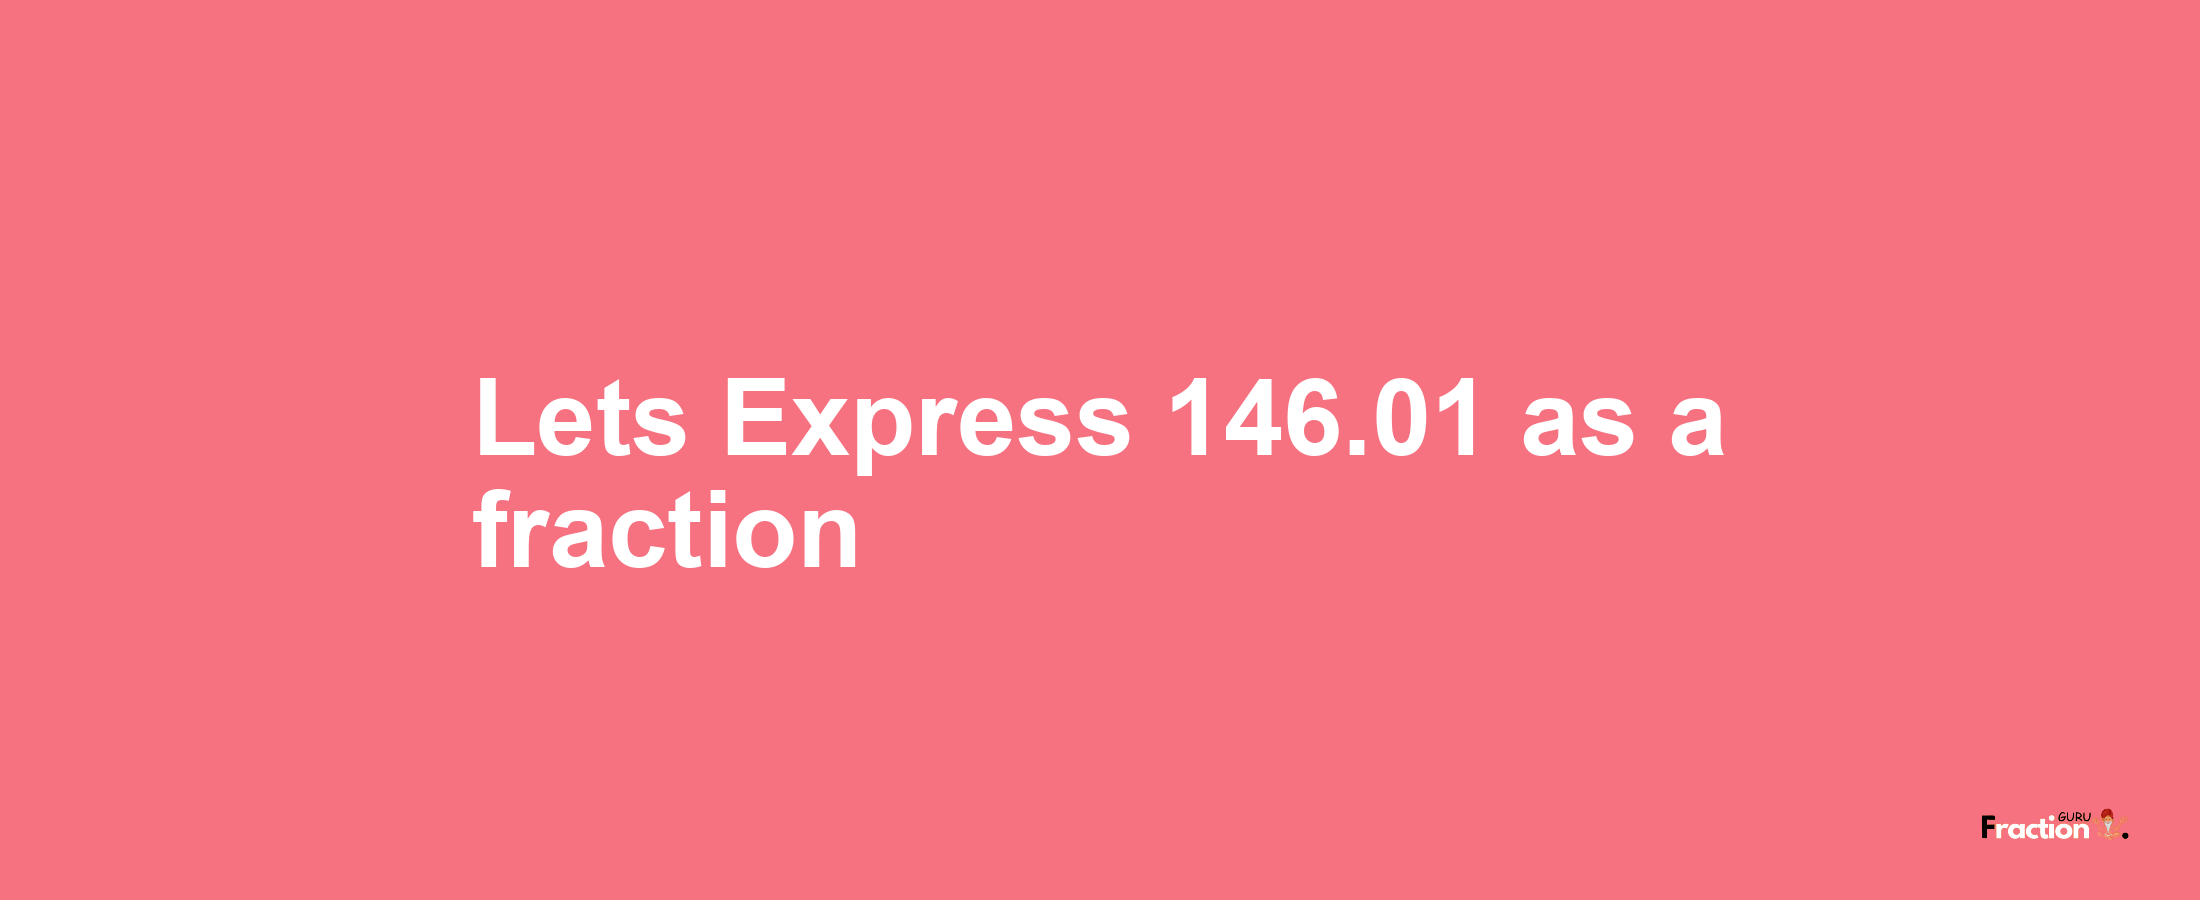 Lets Express 146.01 as afraction